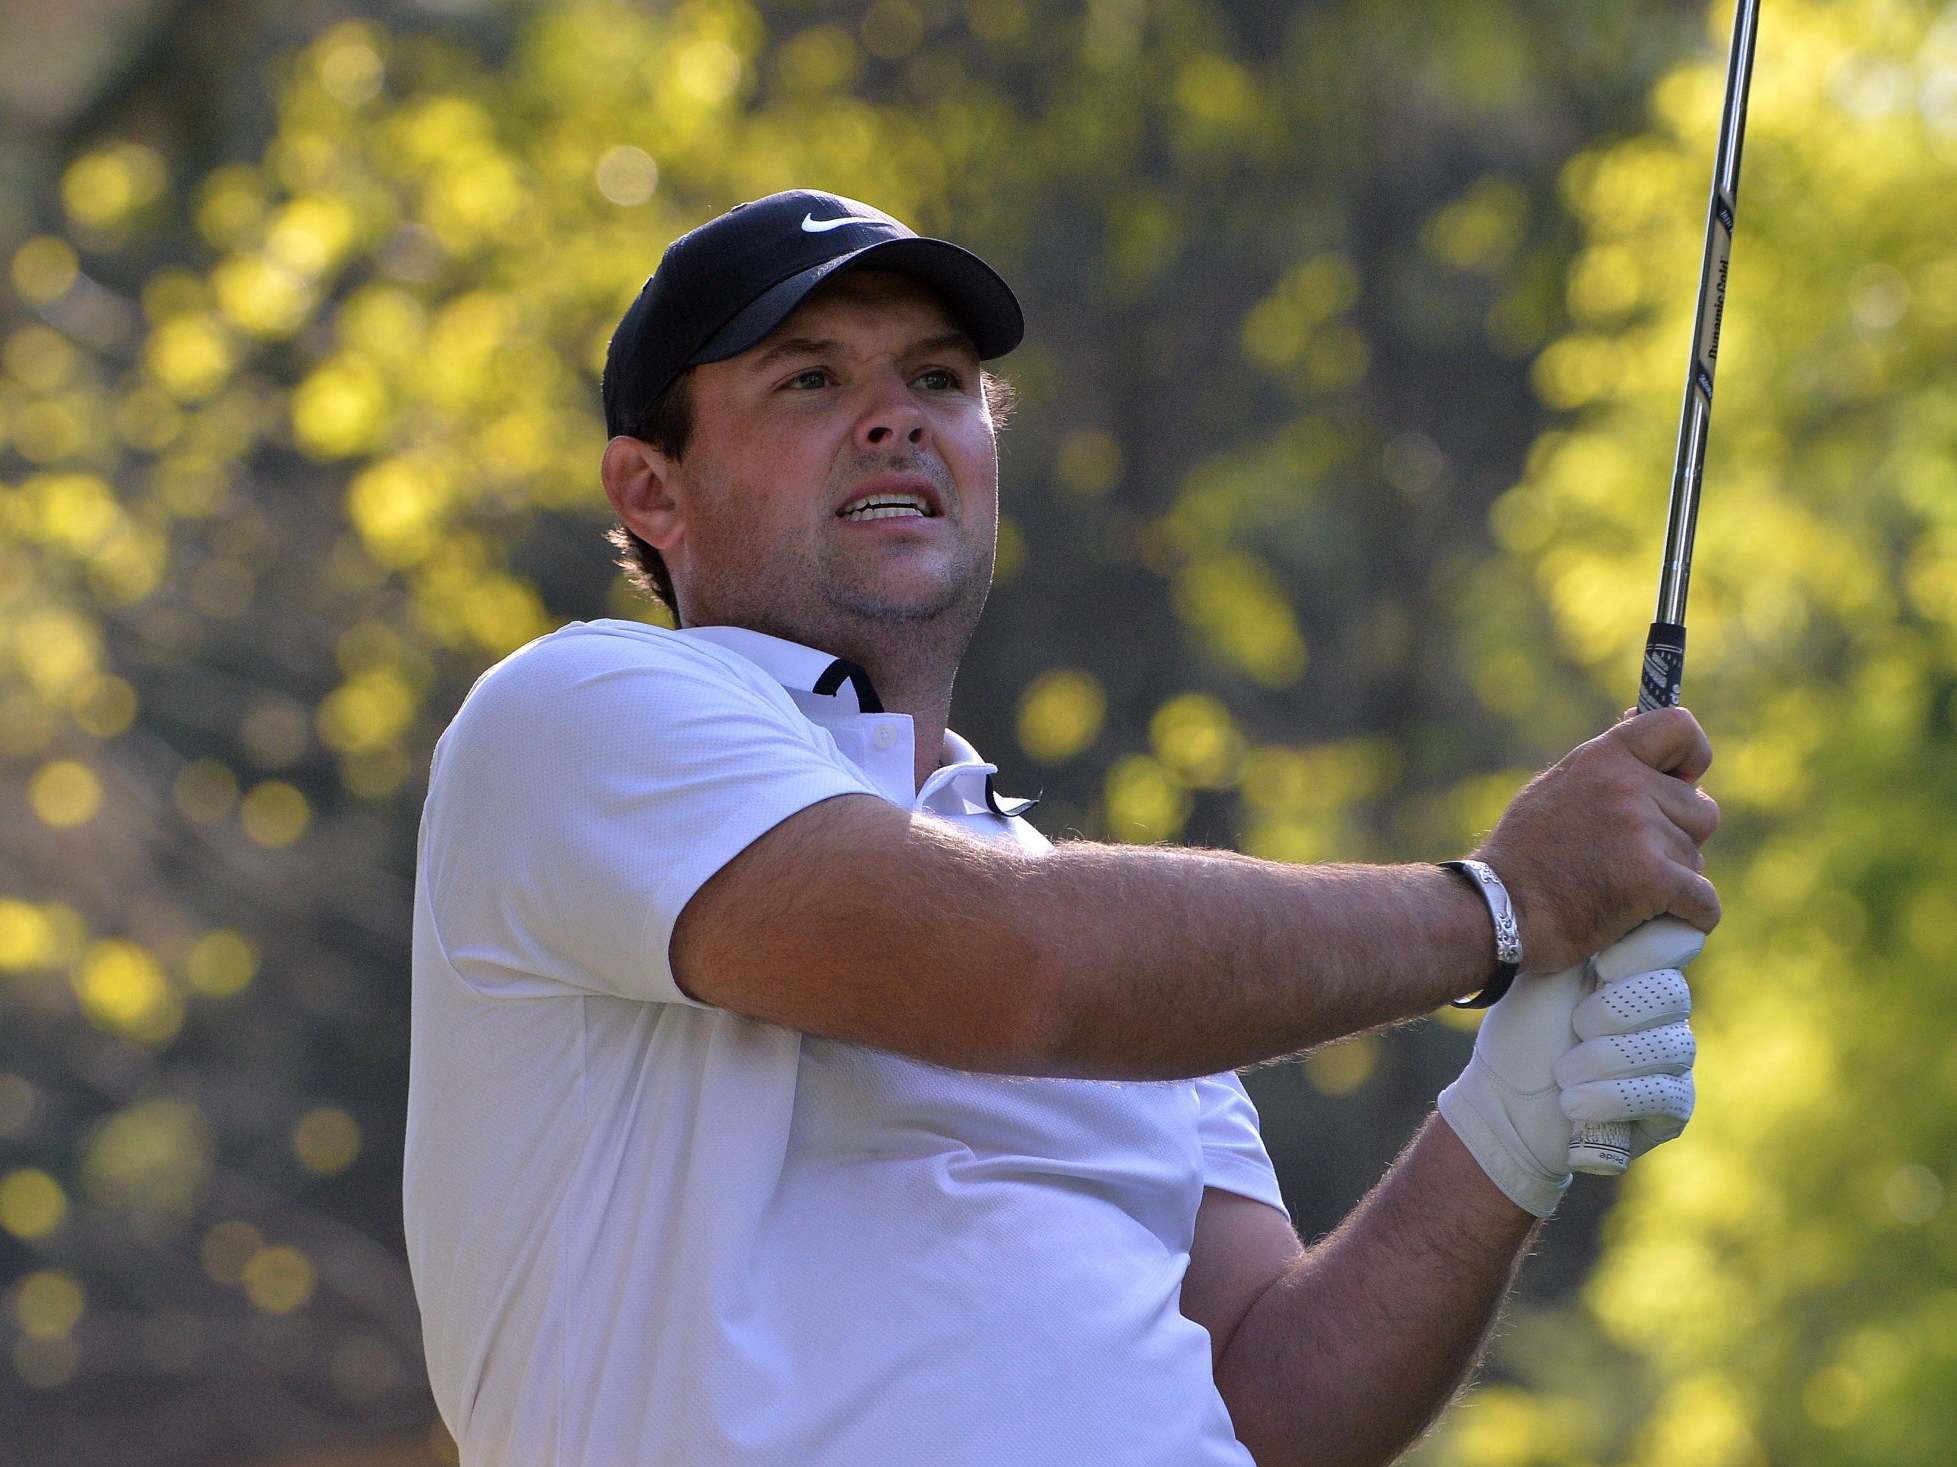 Patrick Reed insists he is done talking about the incident